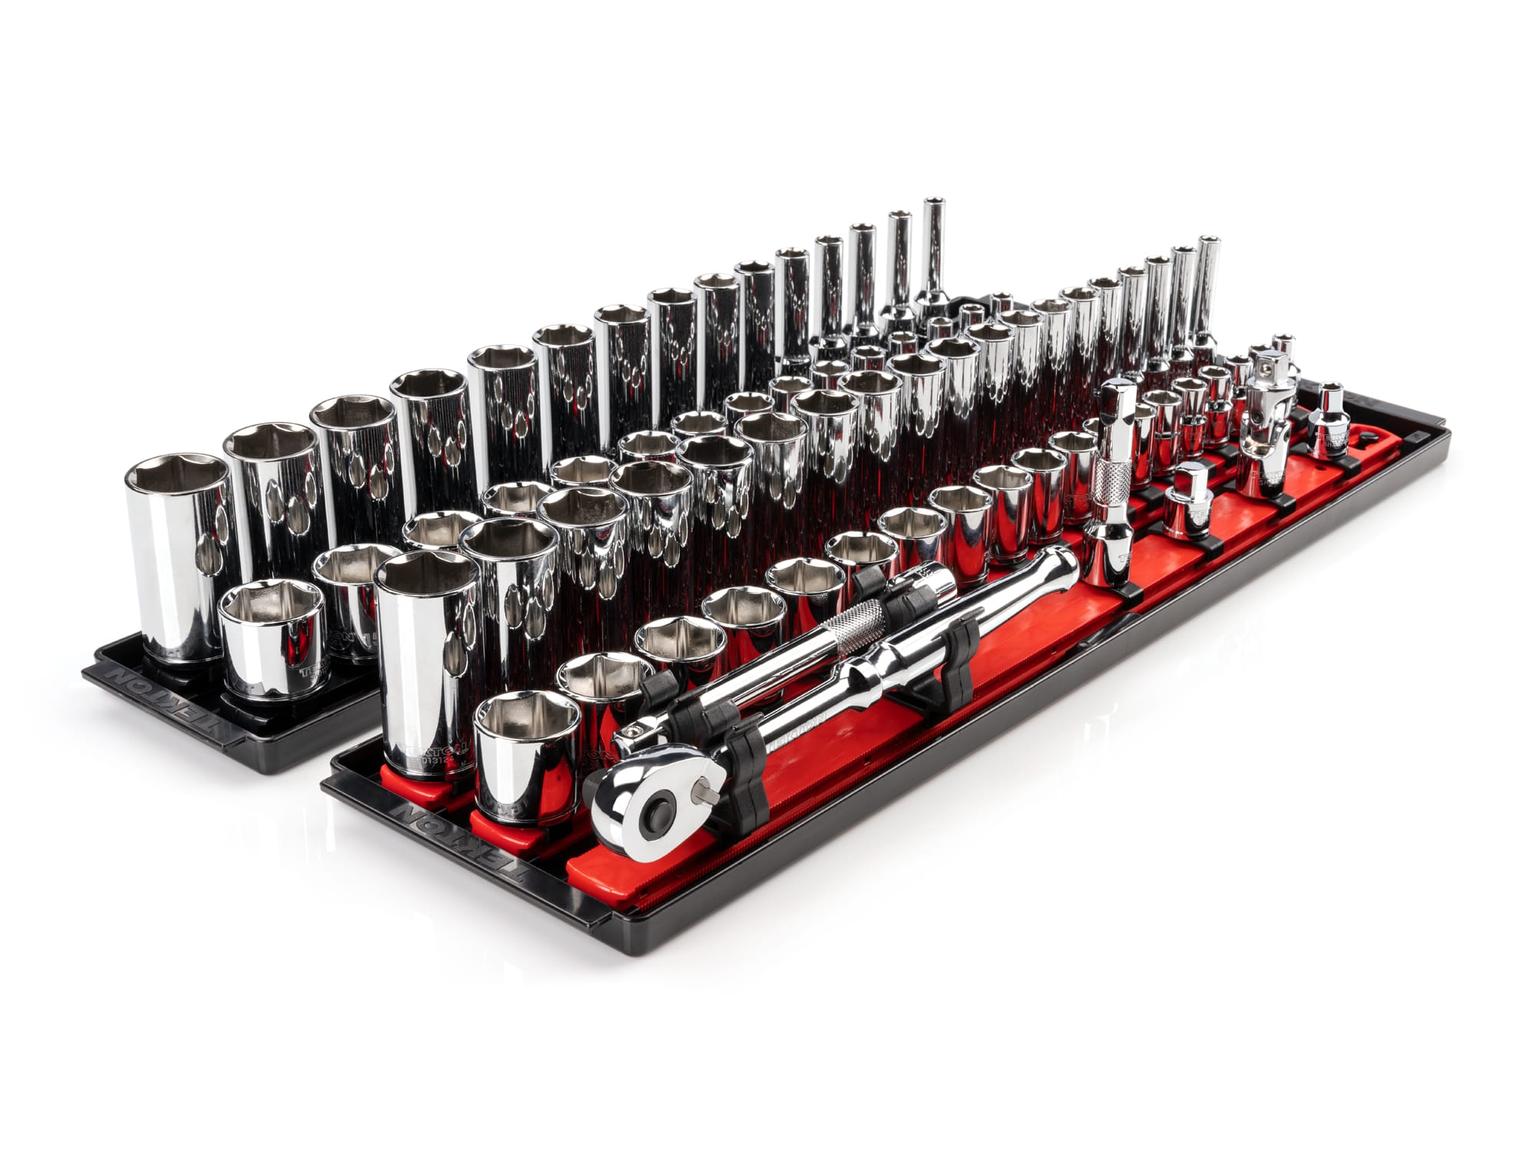 TEKTON SKT13301-T 3/8 Inch Drive 6-Point Socket and Ratchet Set with Rails, 74-Piece (1/4-1 in., 6-24 mm)